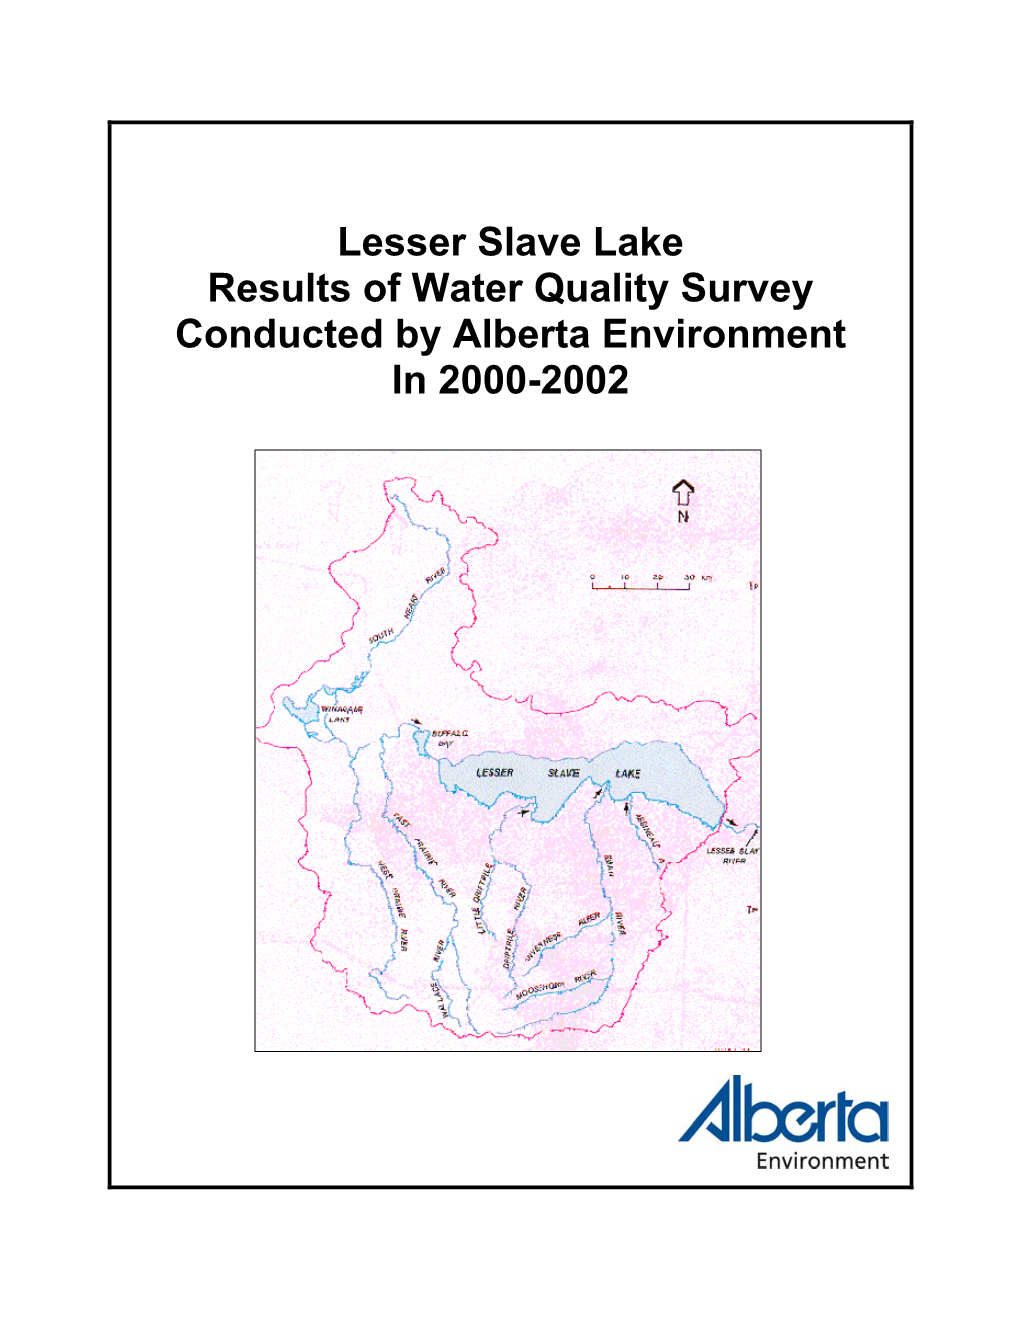 Lesser Slave Lake Results of Water Quality Survey Conducted by Alberta Environment in 2000-2002